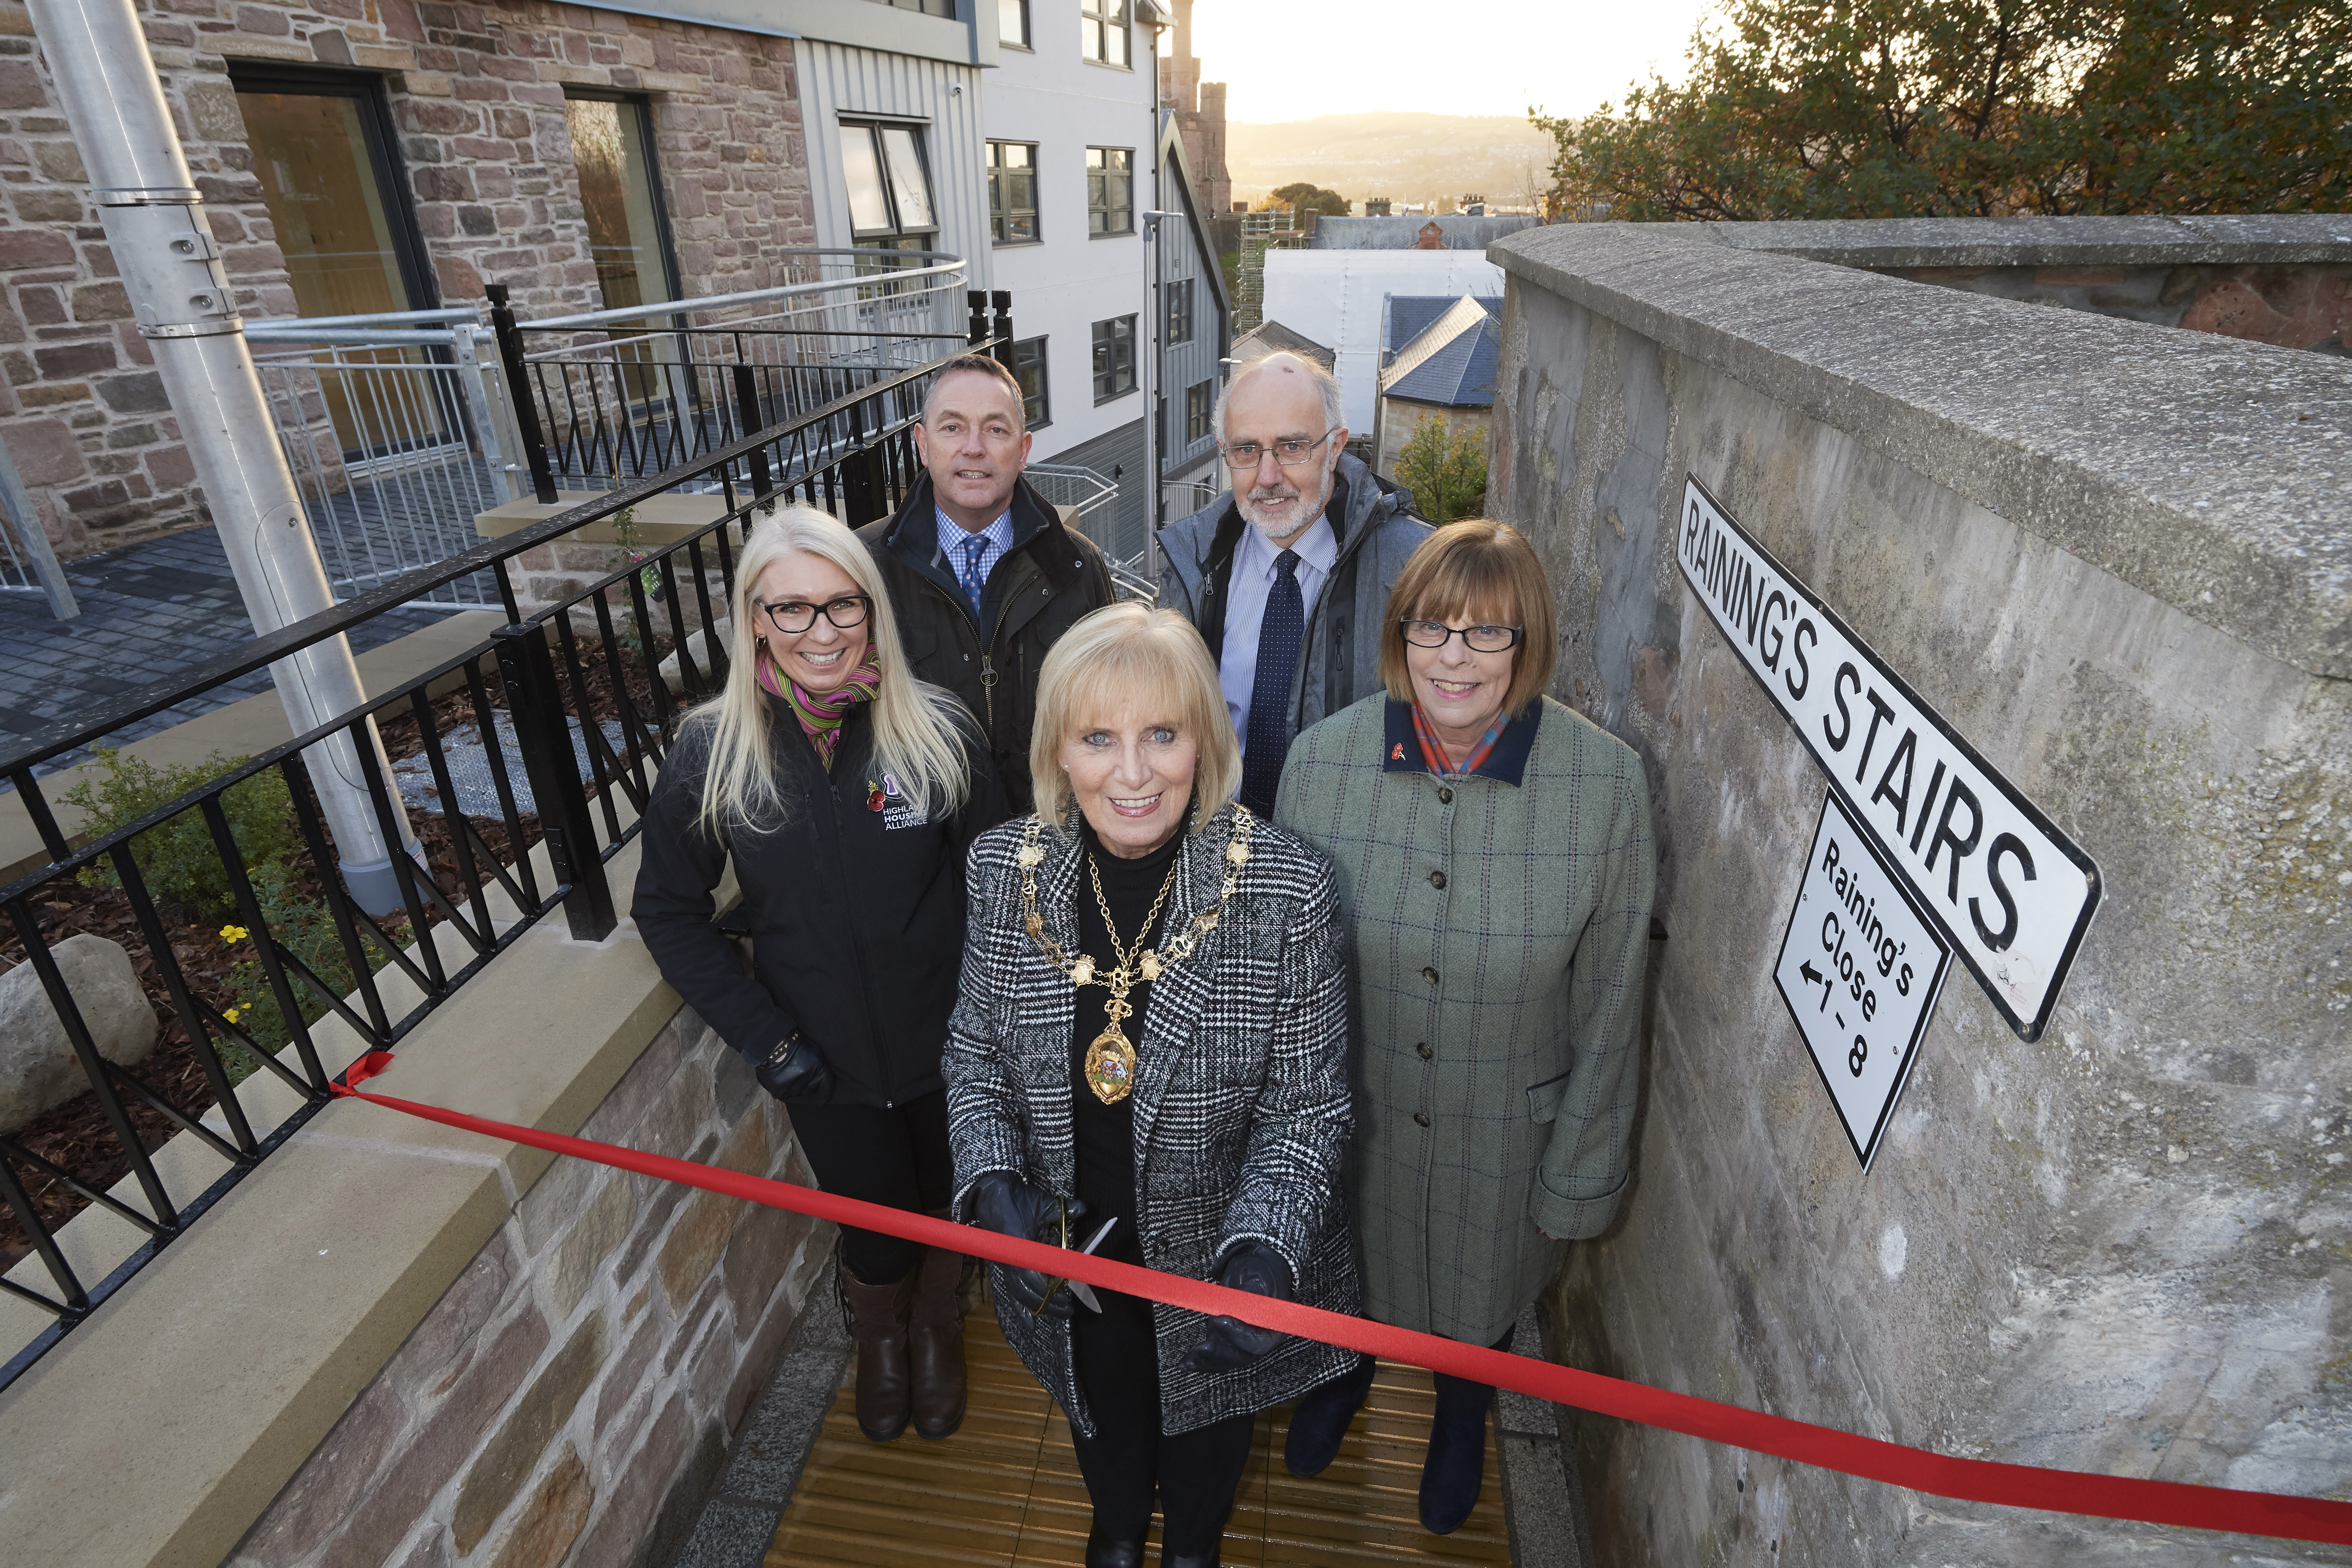 Provost Helen Carmichael cut the ribbon to signify completion of the raining stairs development.